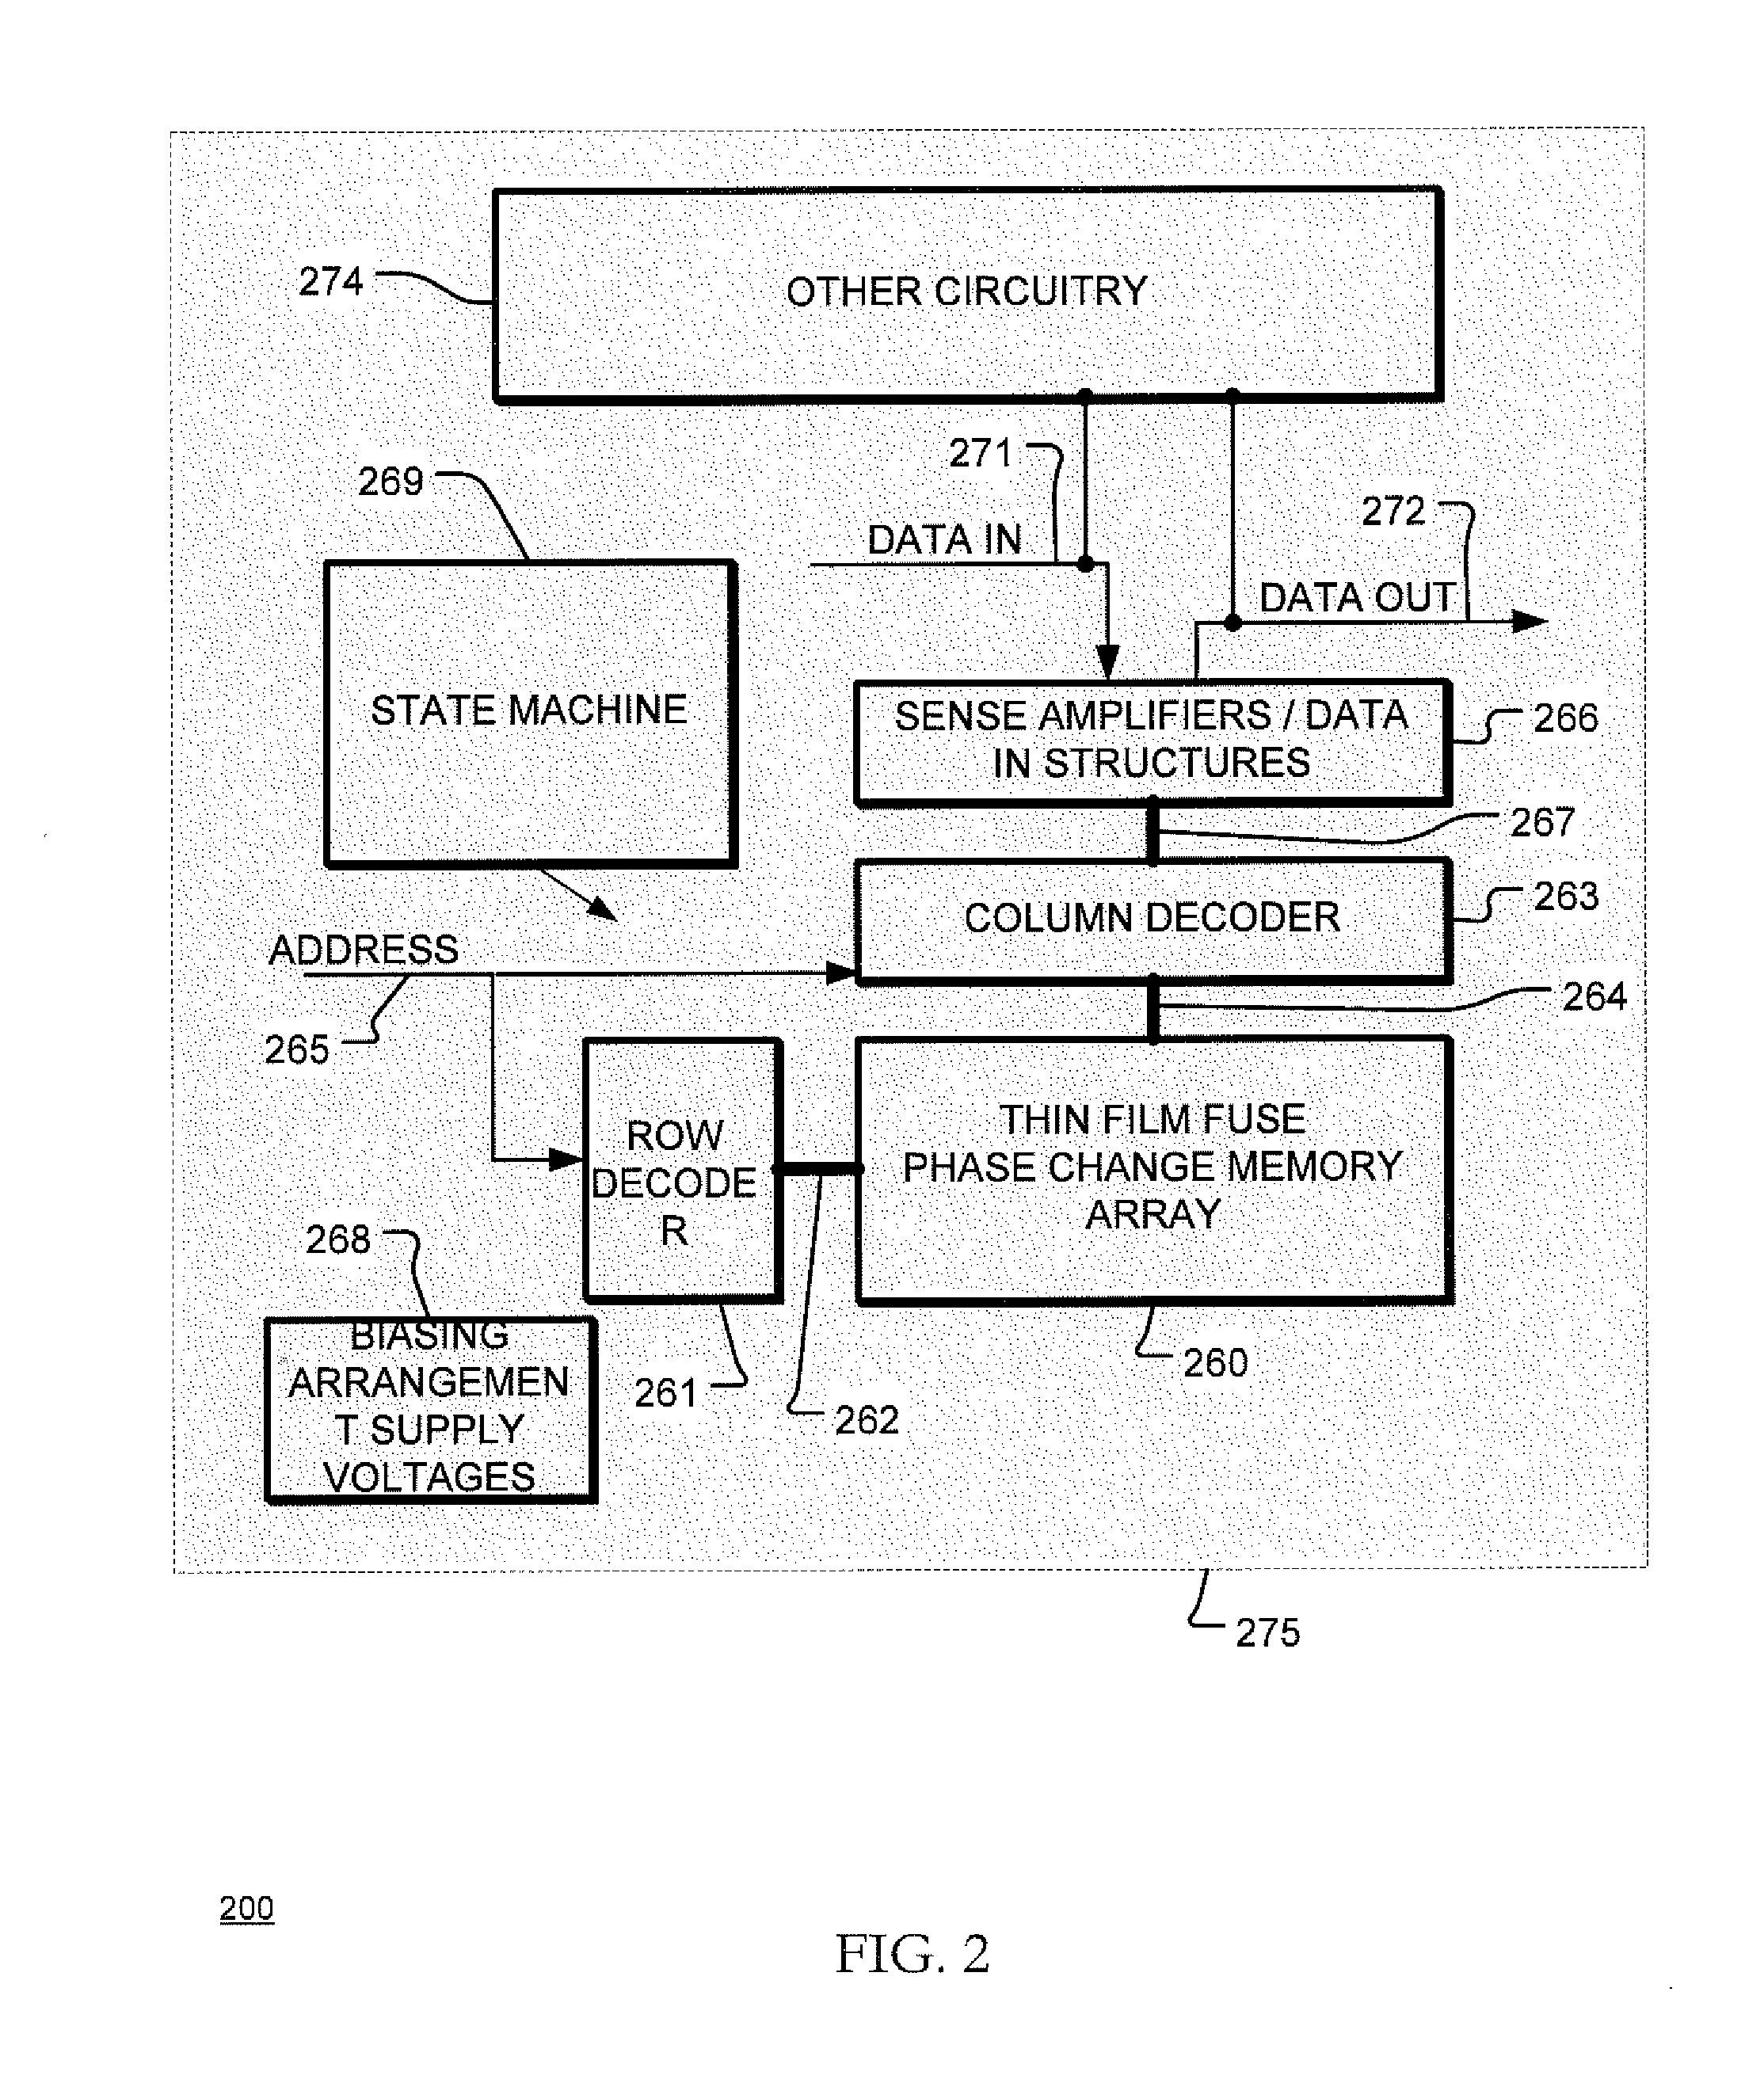 Multi-level cell resistance random access memory with metal oxides